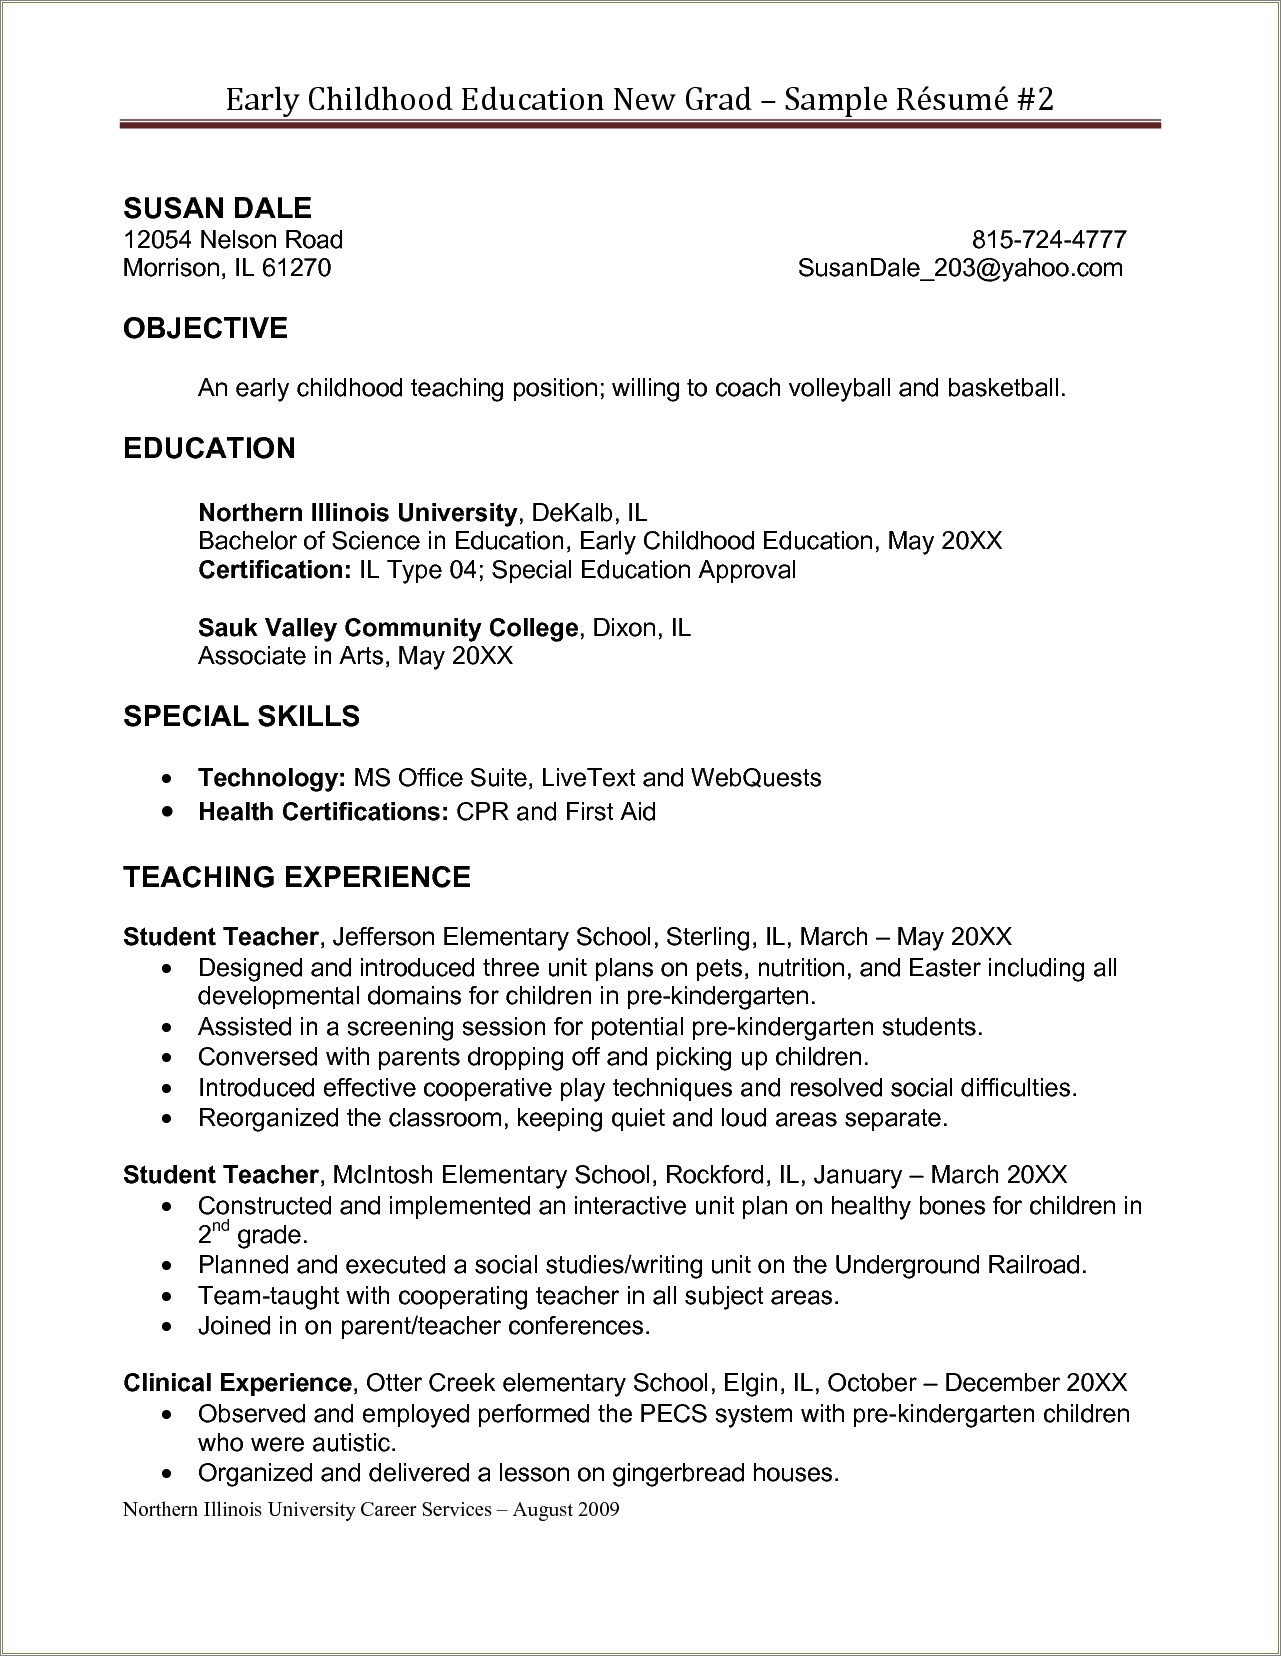 Early Childhood Education Student Resume Sample